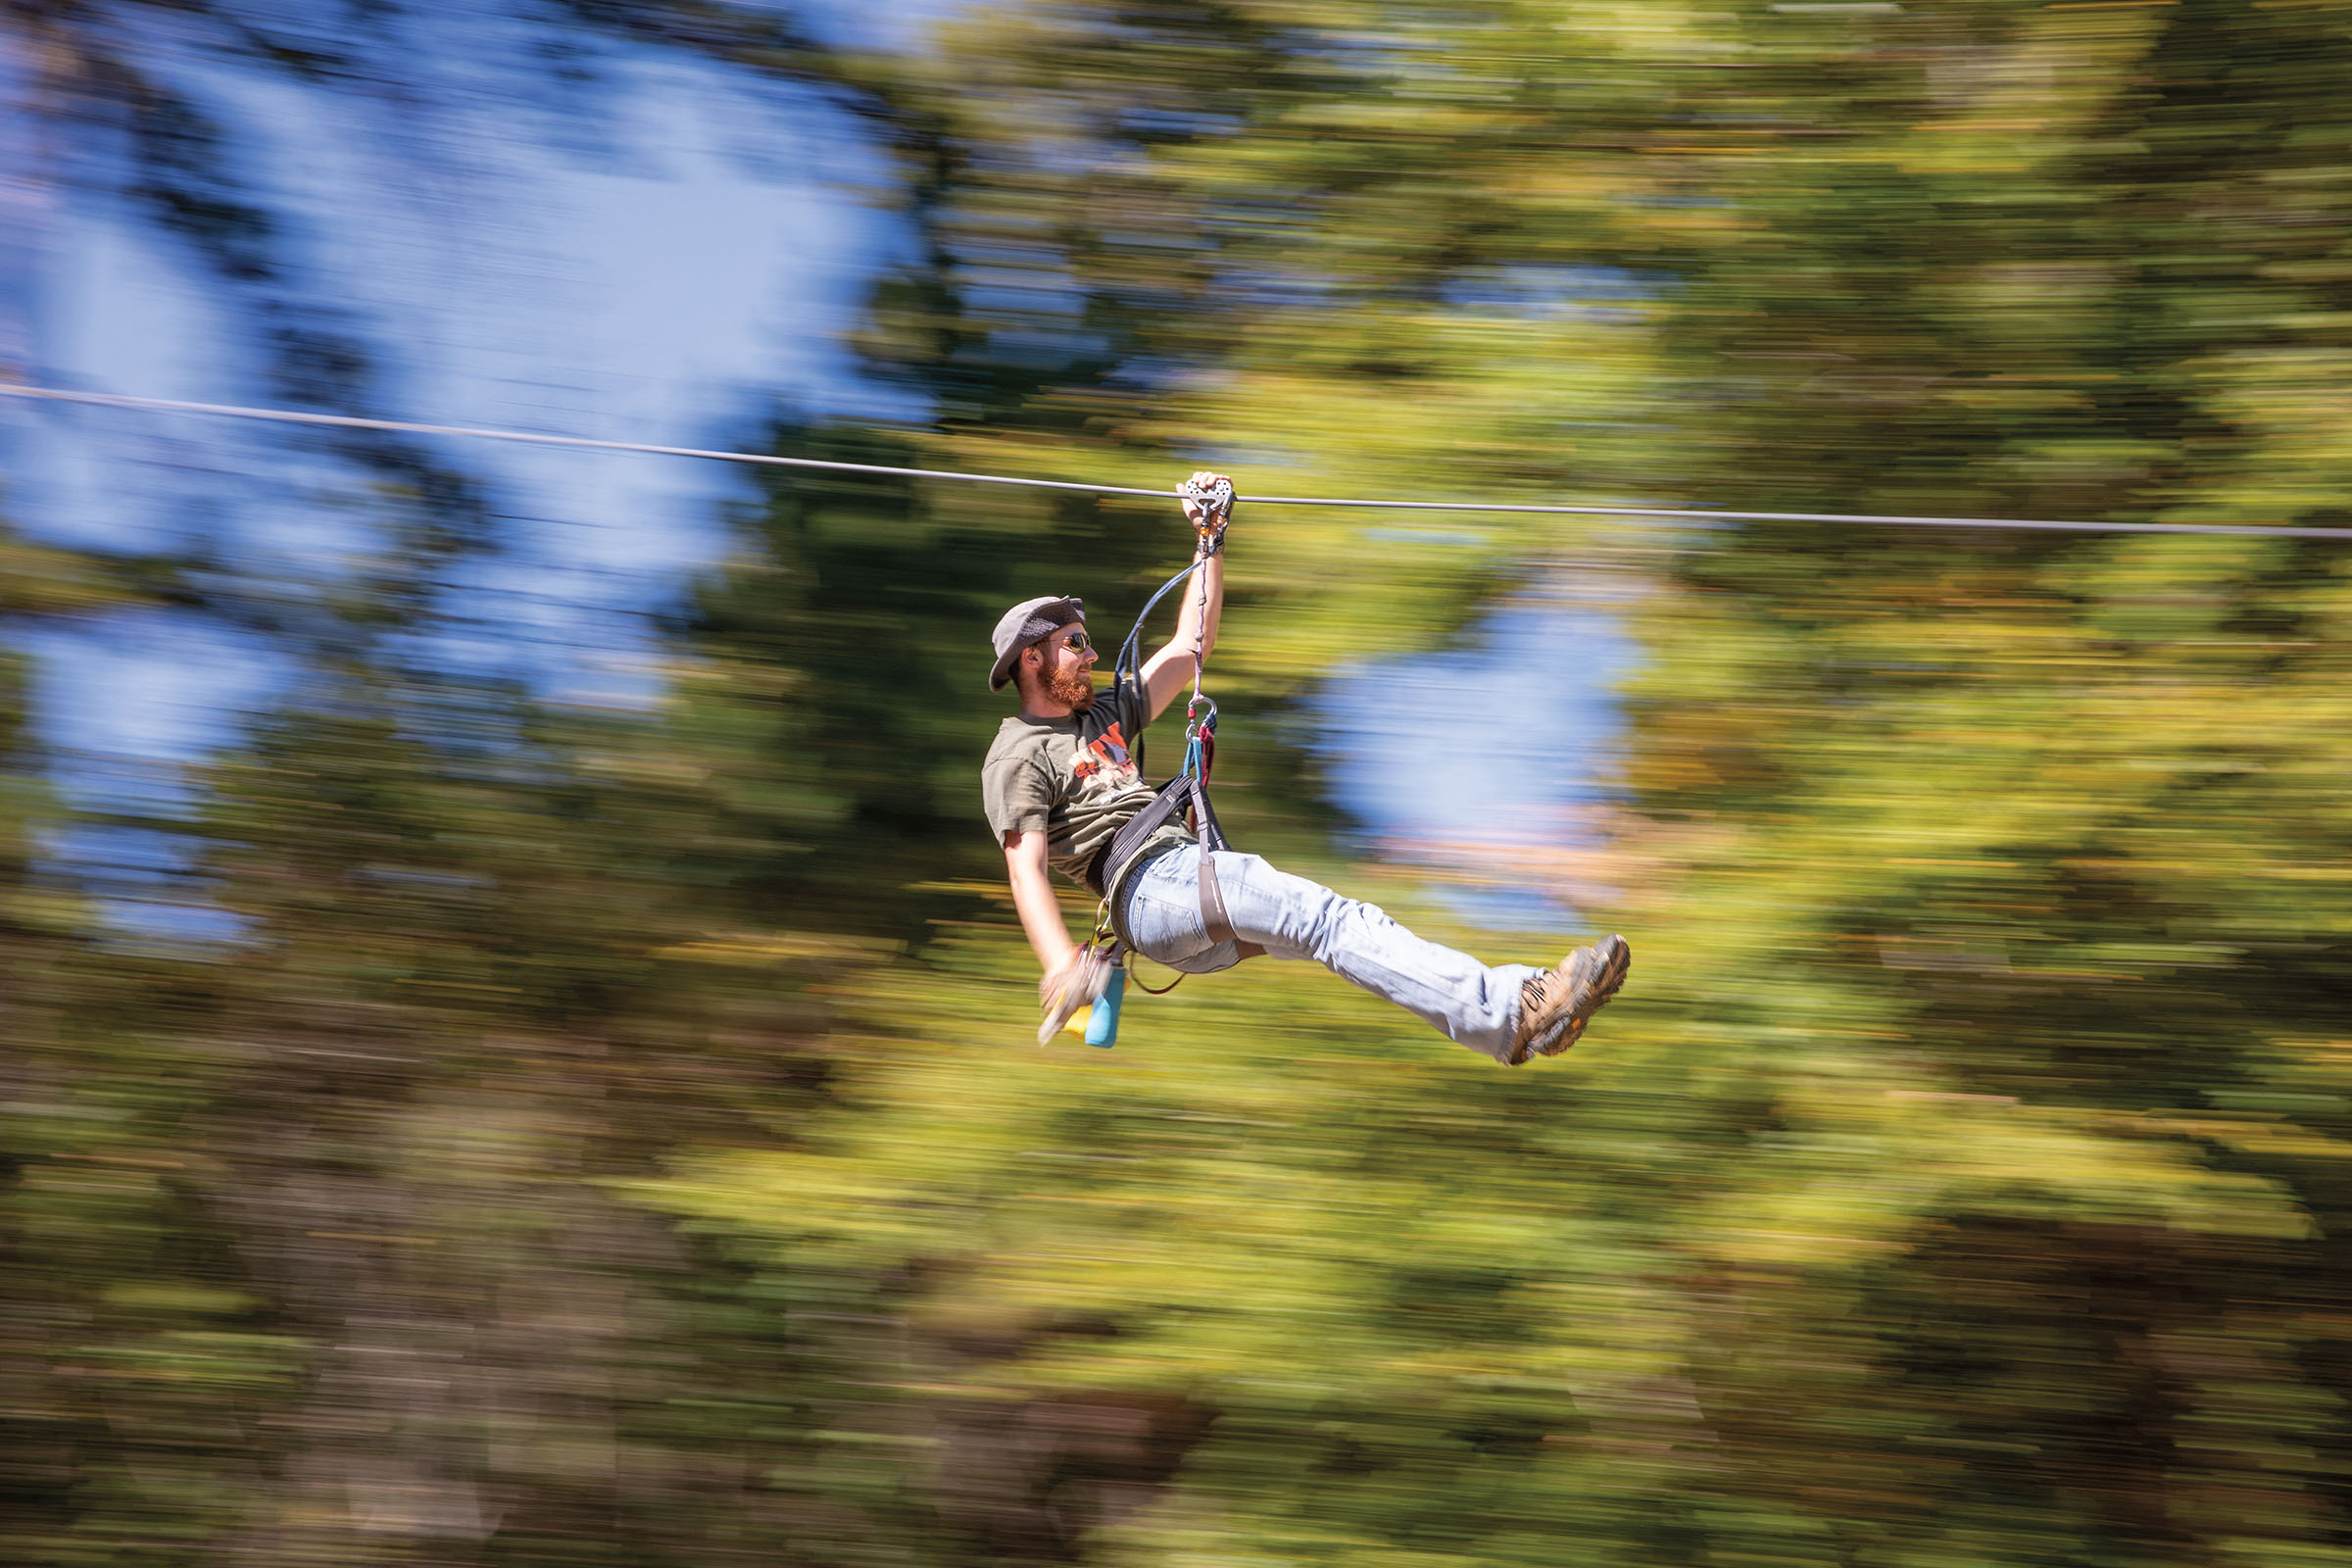 A person wearing long pants and a helmet whizzes through the air in front of green trees